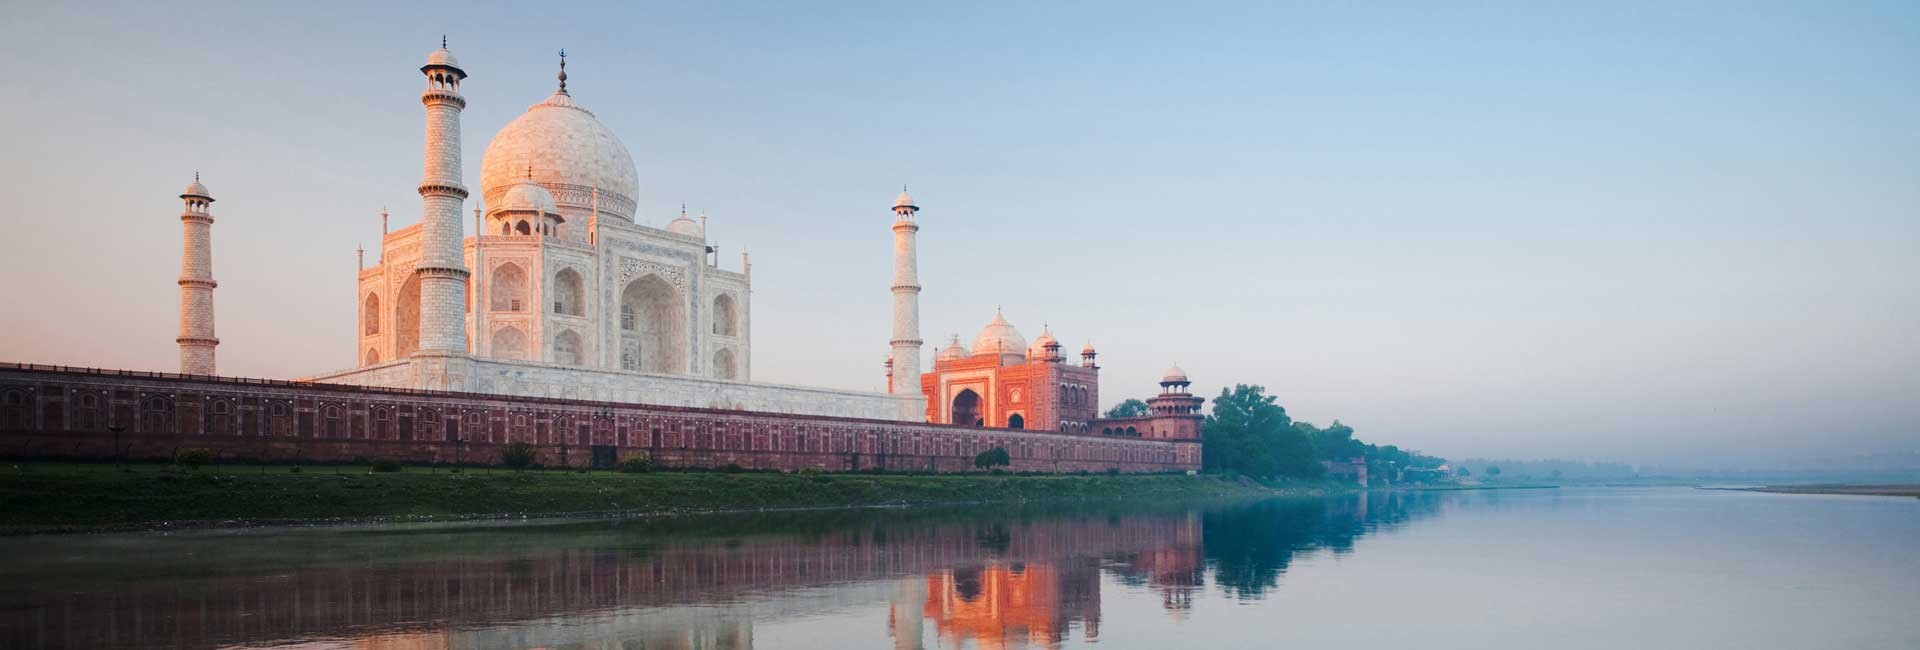 Luxury India Tour Packages